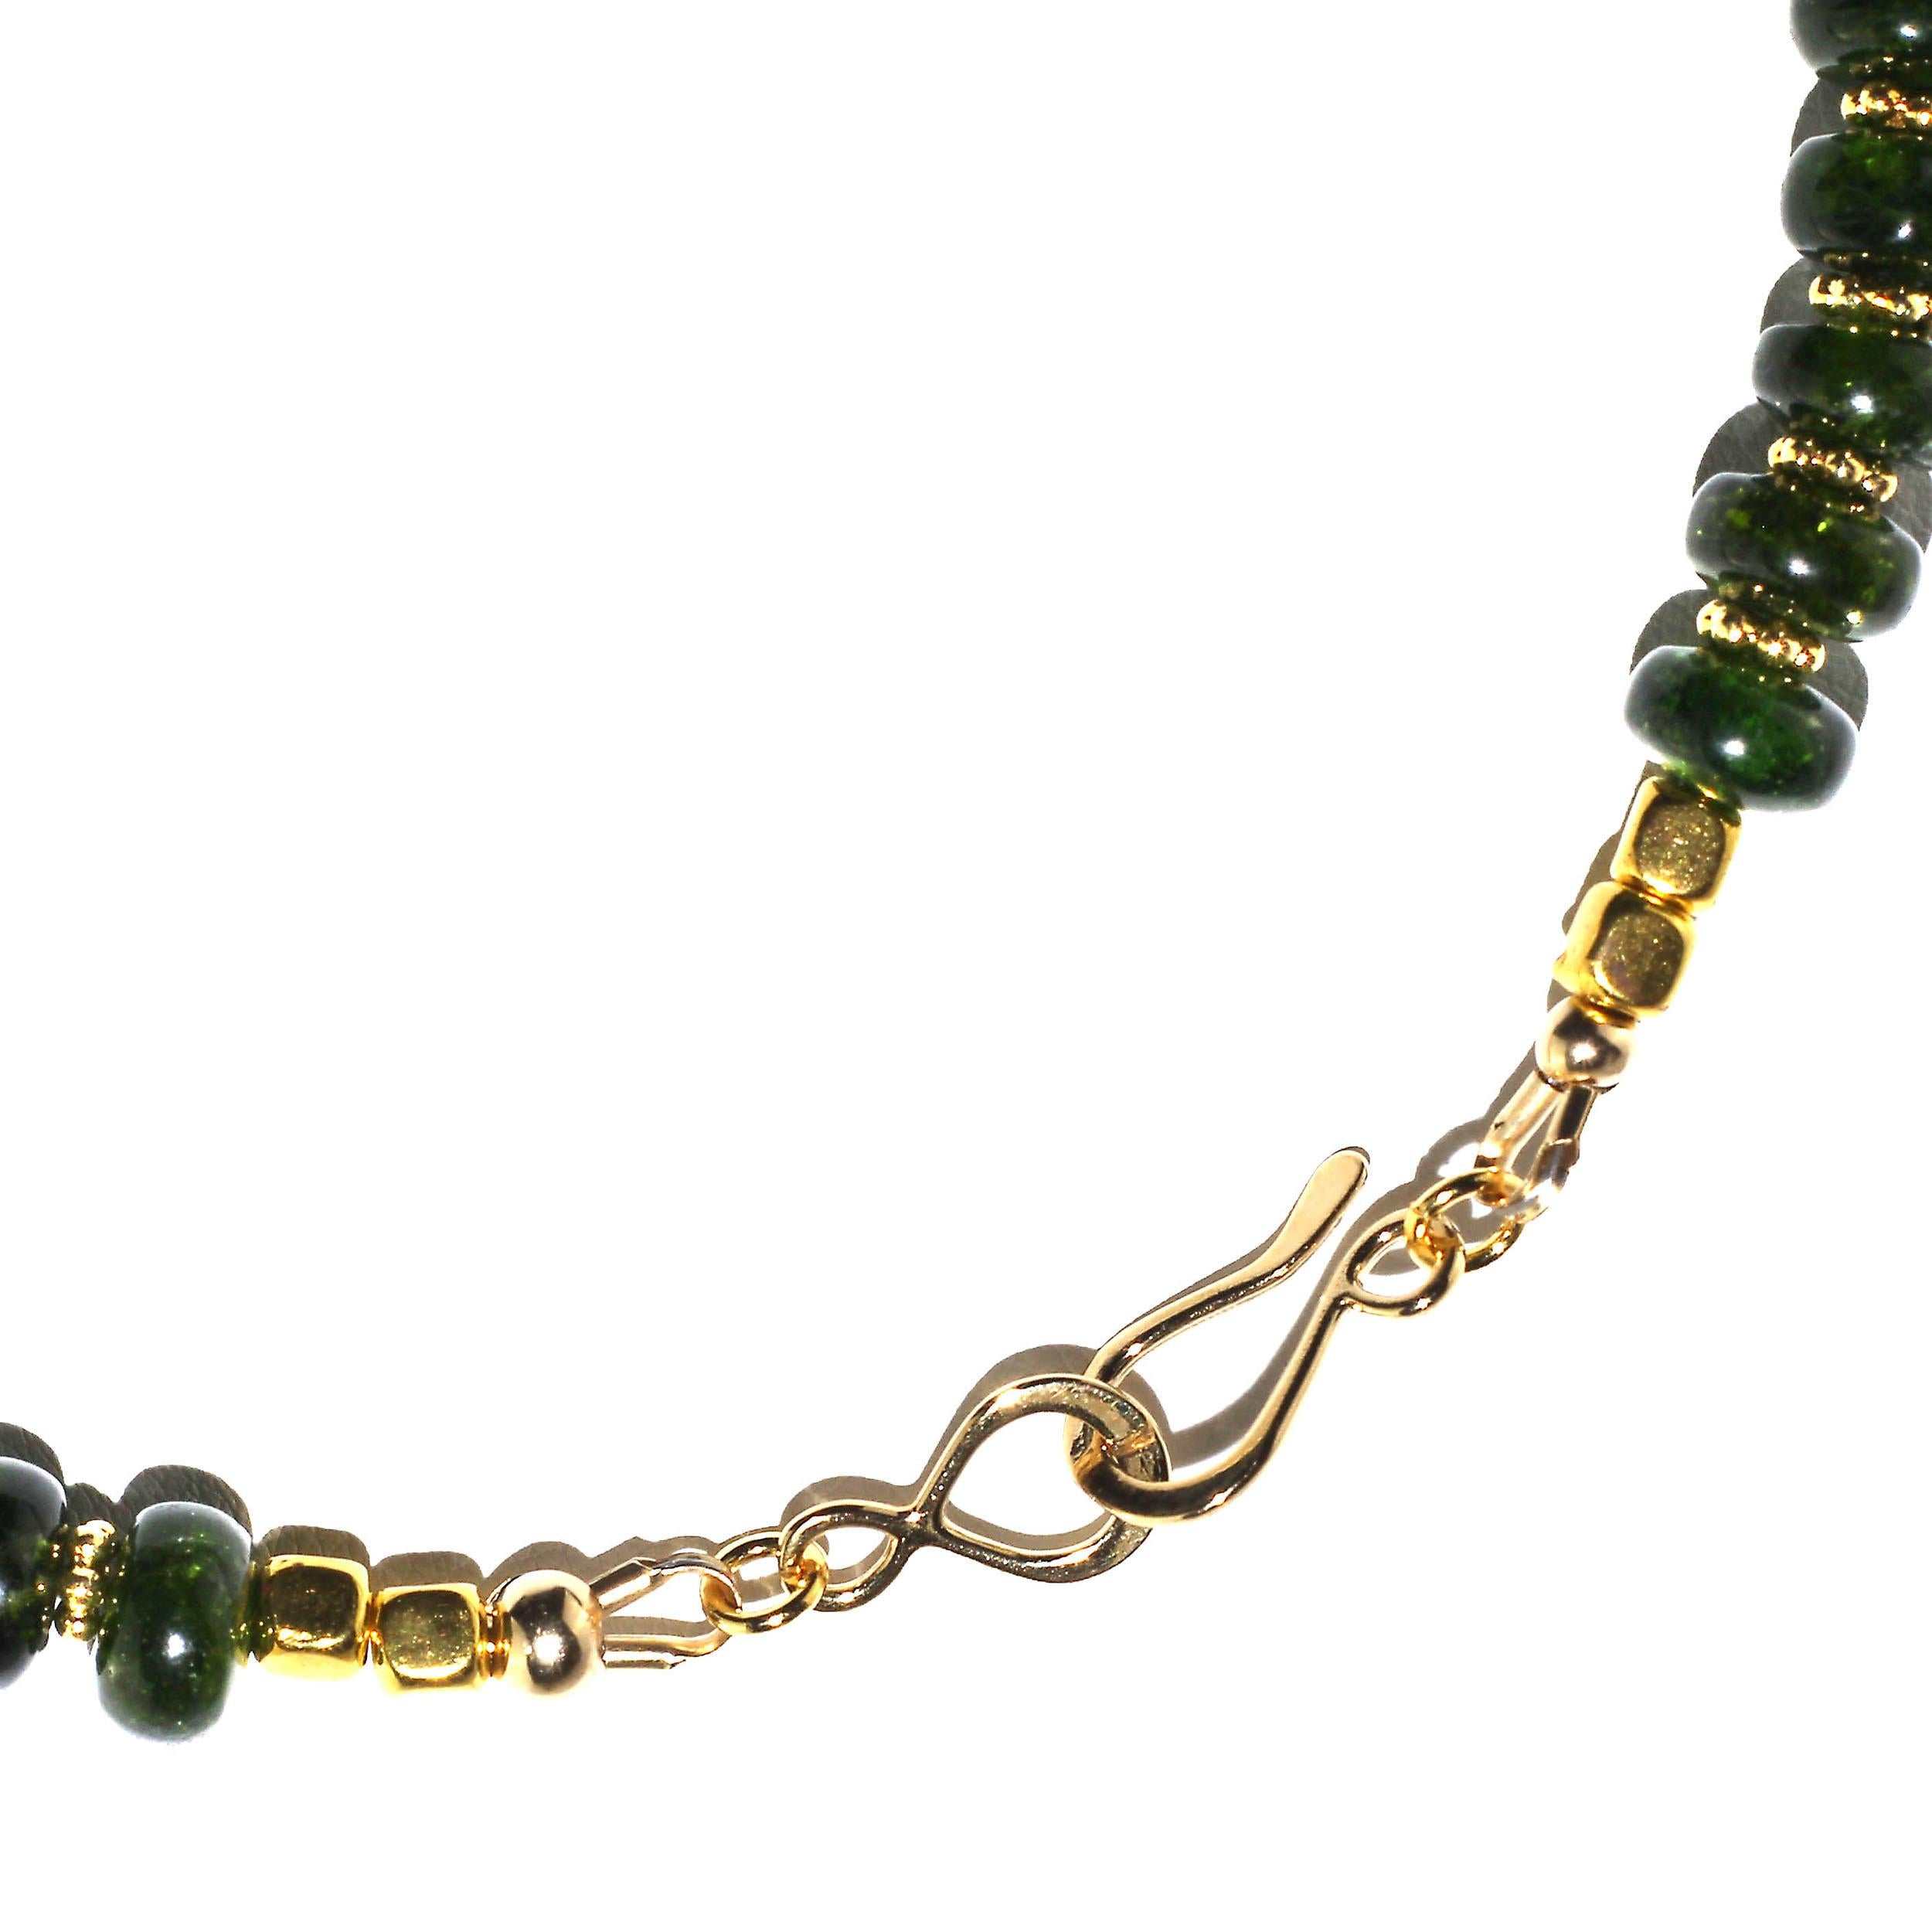 Bead Gemjunky Sparkling Chrome Diopside Necklace with Goldy Accents